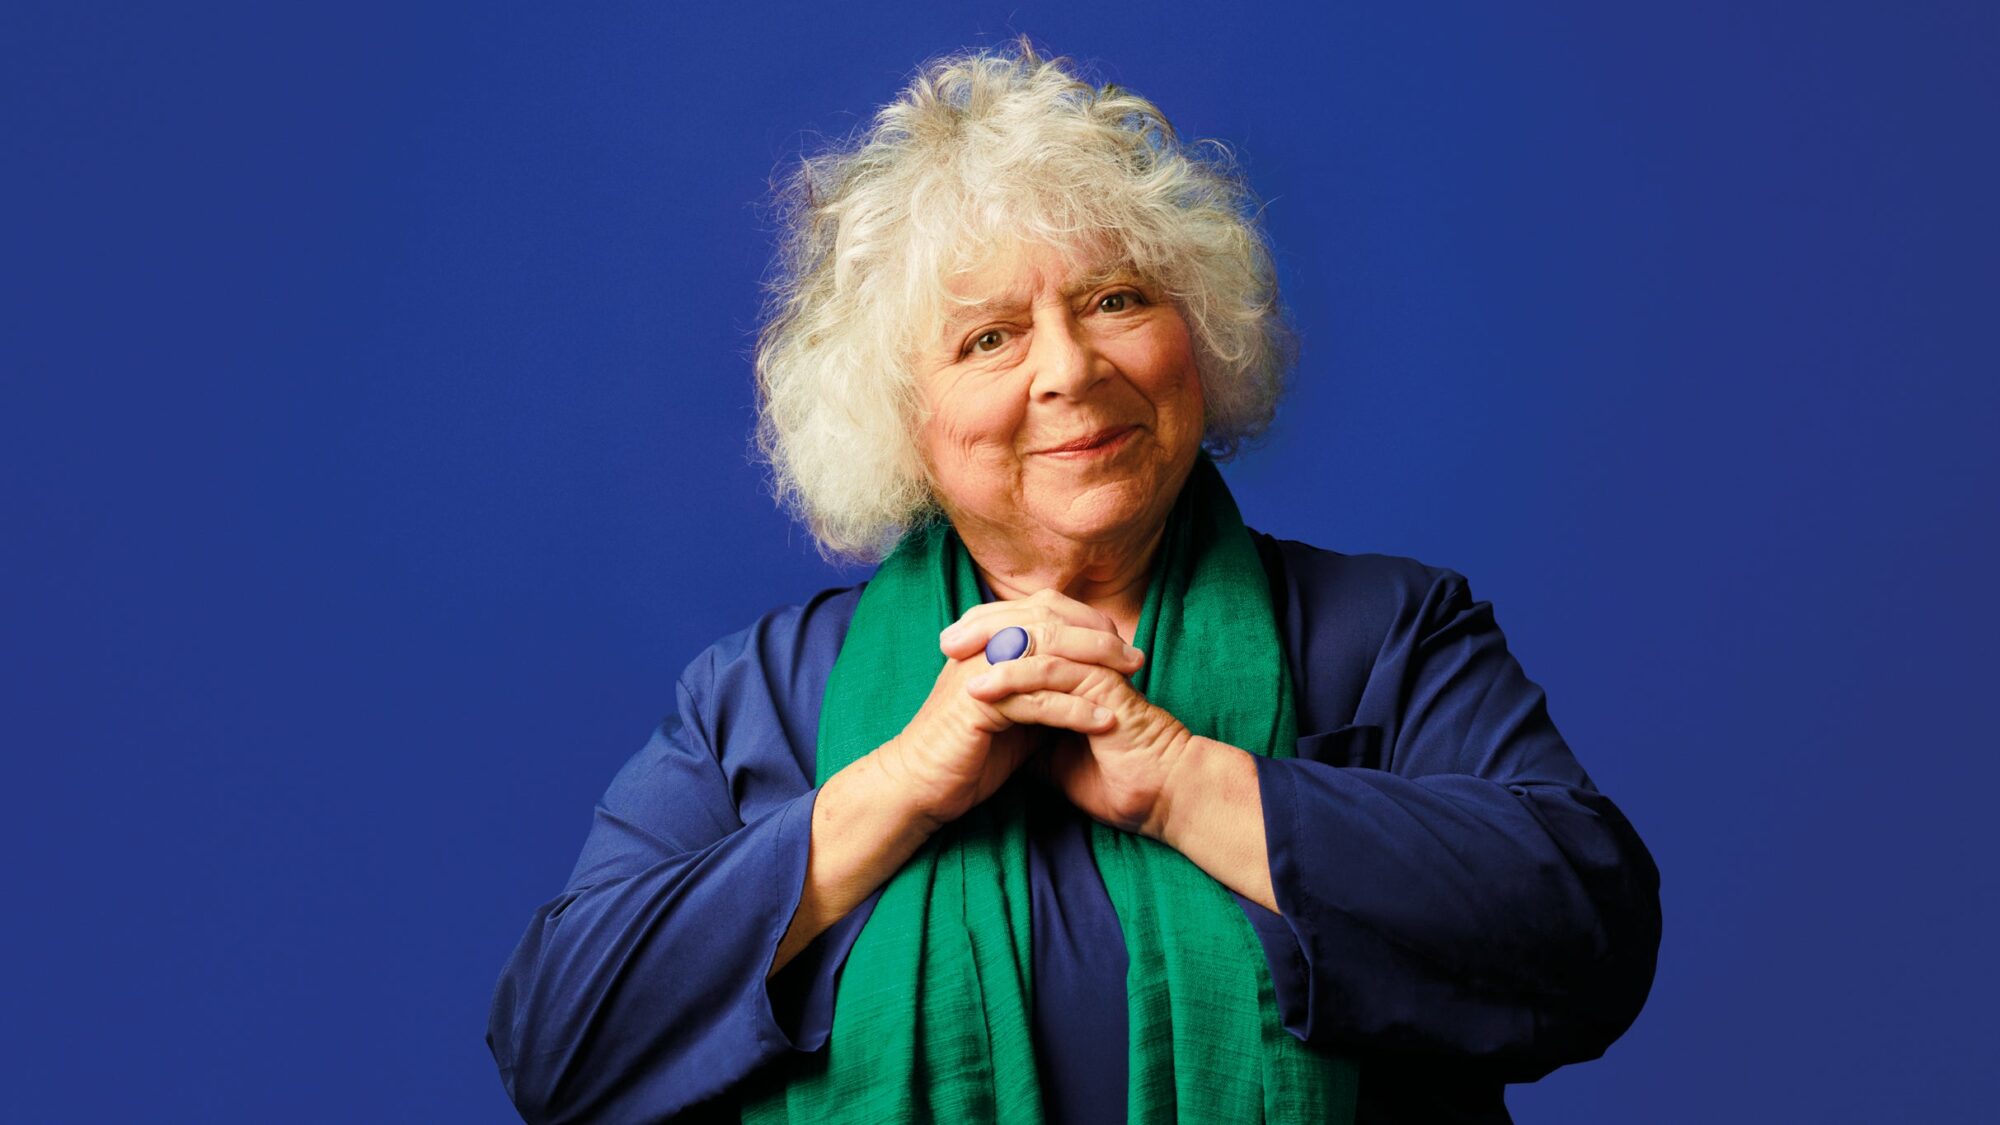 Image name Miriam Margolyes at York Barbican York the 4 image from the post Miriam Margolyes: Oh Miriam! Live at Sheffield City Hall Oval Hall, Sheffield in Yorkshire.com.